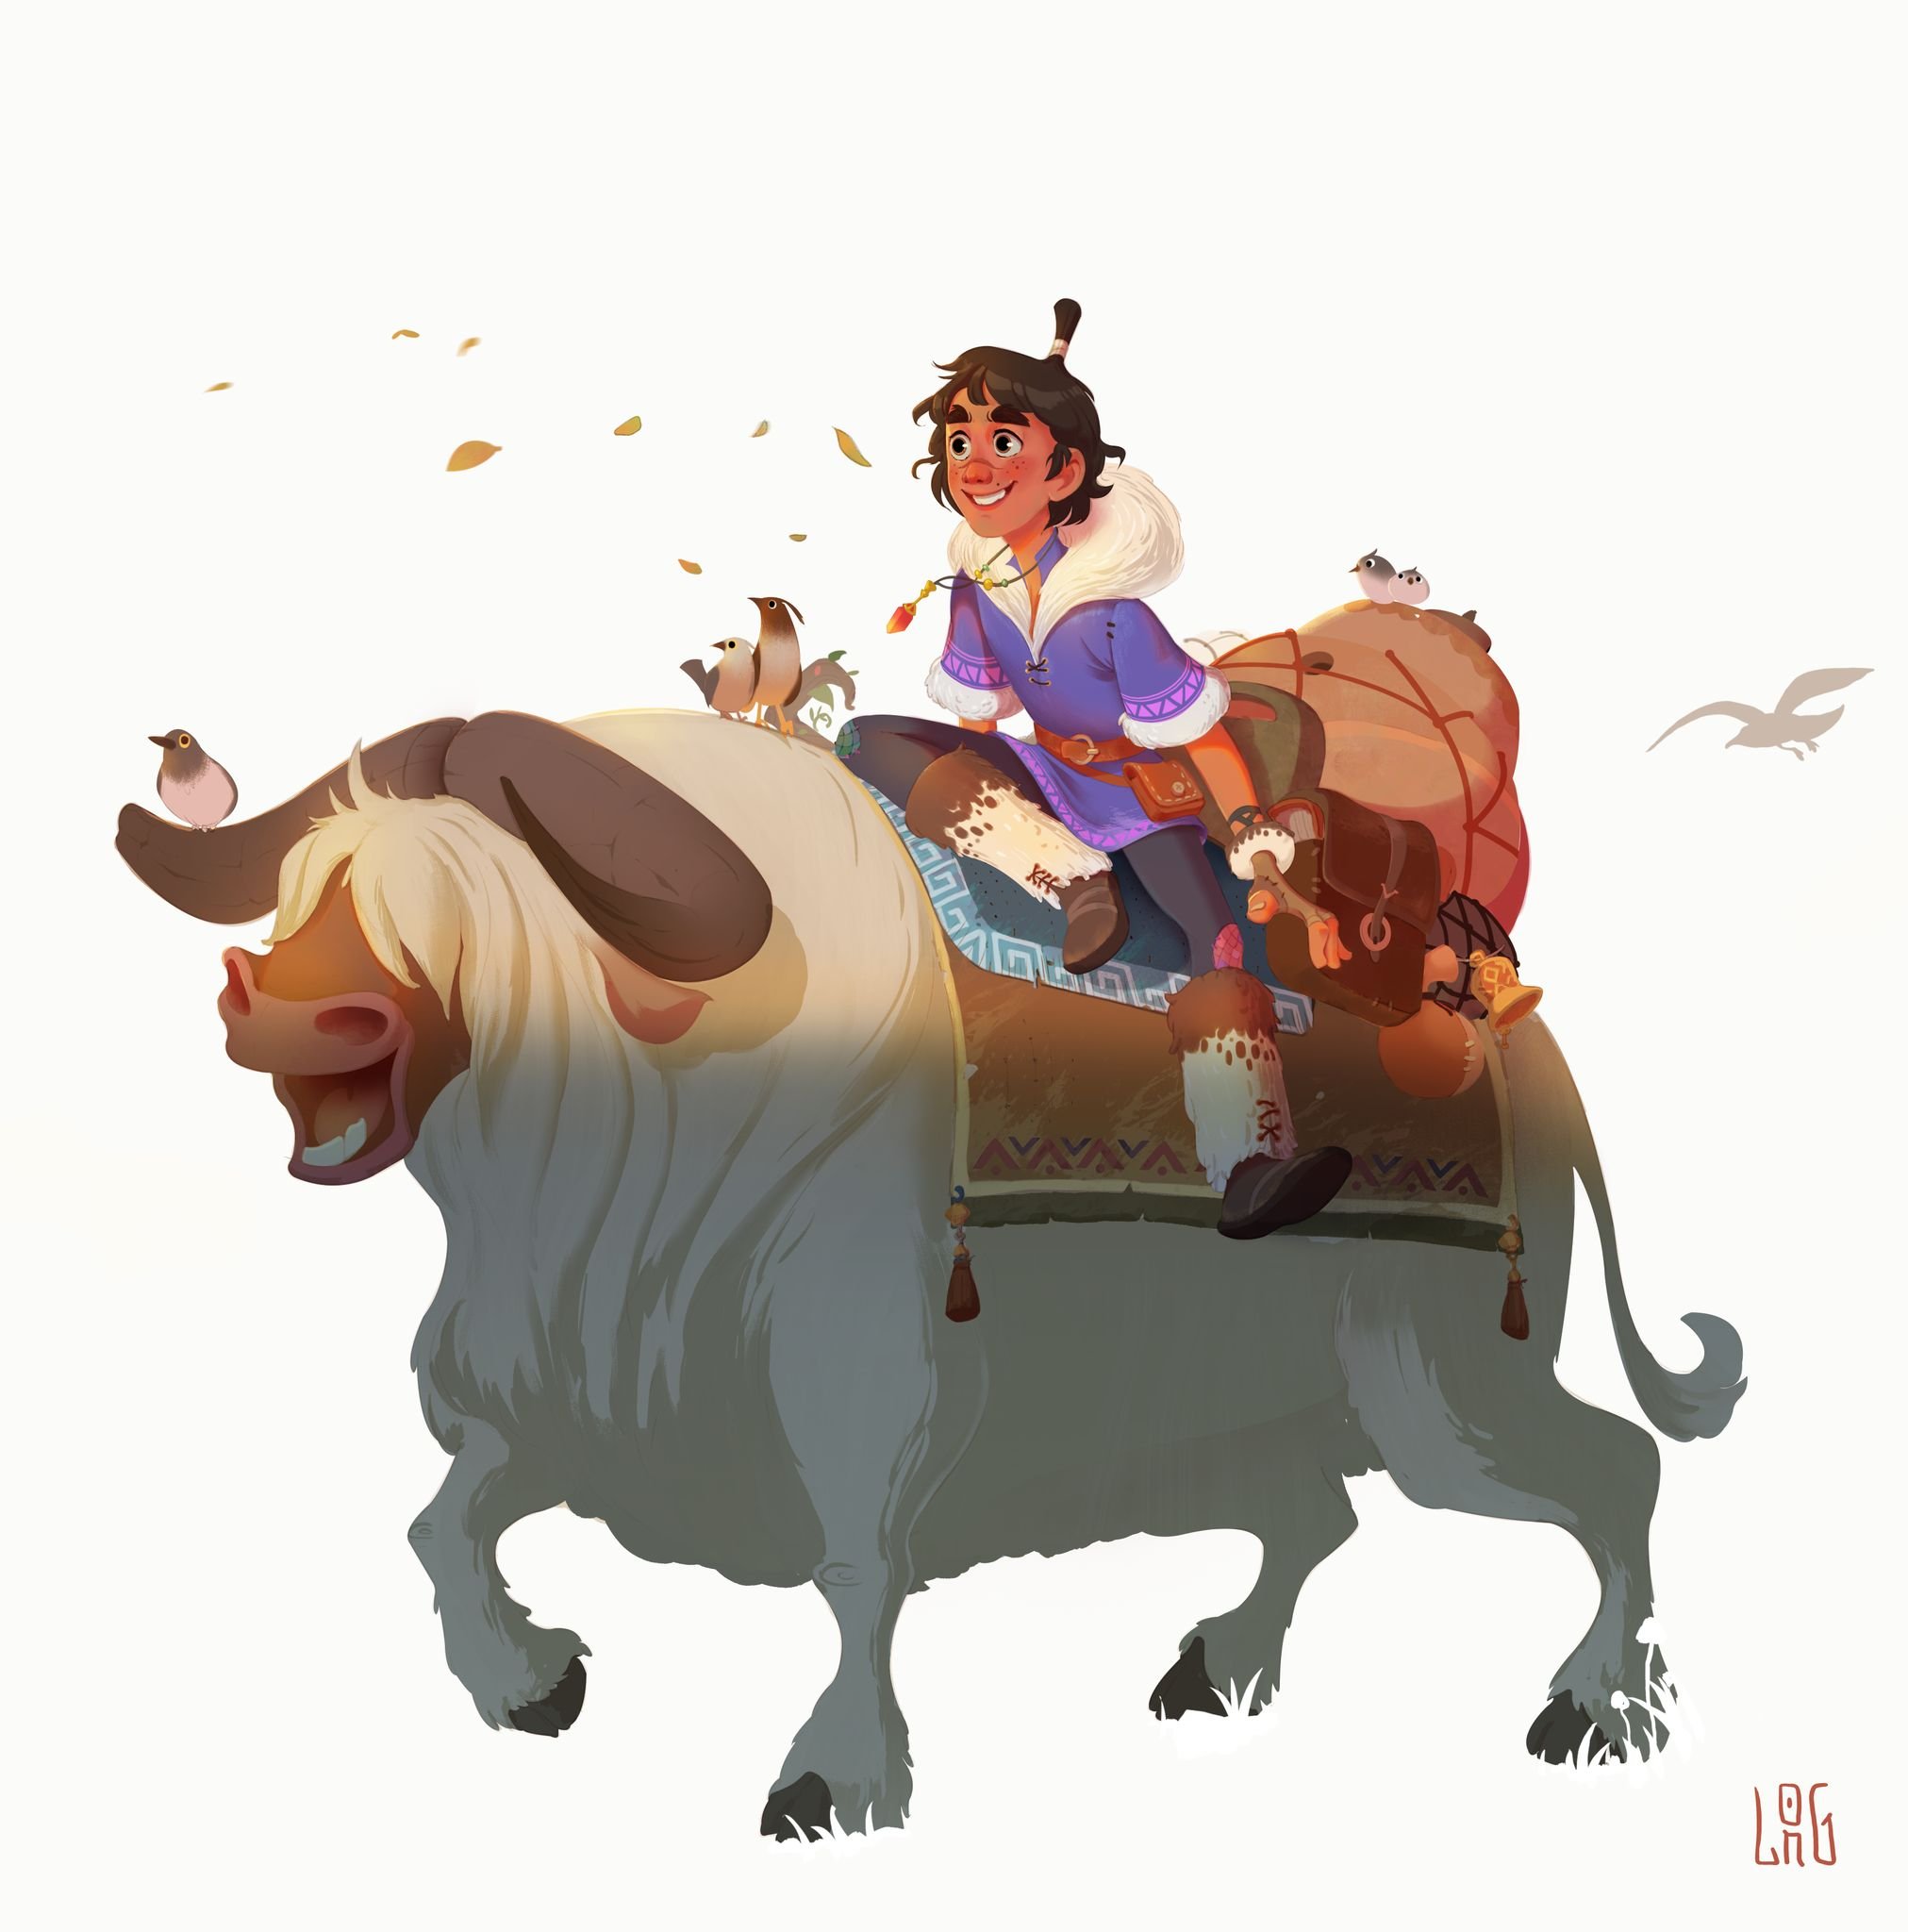 Submission by Bảo Long* ( @palovevoi ) for the #CDChallenge - the theme for April 2024 was #TravelingShepherd⠀⠀⠀⠀⠀⁣⠀⁣⠀⠀⠀⁠⠀⁠⠀⁠⠀⁠⠀⁠⠀⁠⠀⁠⠀⁠⠀
.⠀⠀⠀⠀⠀⠀⁣⠀⁣⠀⠀⠀⁠⠀⁠⠀⁠⠀⁠⠀⁠⠀⁠⠀⁠⠀⁠⠀
.⠀⠀⠀⠀⠀⠀⁣⠀⁣⠀⠀⠀⁠⠀⁠⠀⁠⠀⁠⠀⁠⠀⁠⠀⁠⠀⁠⠀
.⠀⠀⠀⠀⠀⠀⁣⠀⁣⠀⠀⠀⁠⠀⁠⠀⁠⠀⁠⠀⁠⠀⁠⠀⁠⠀⁠⠀
Presented by #Character